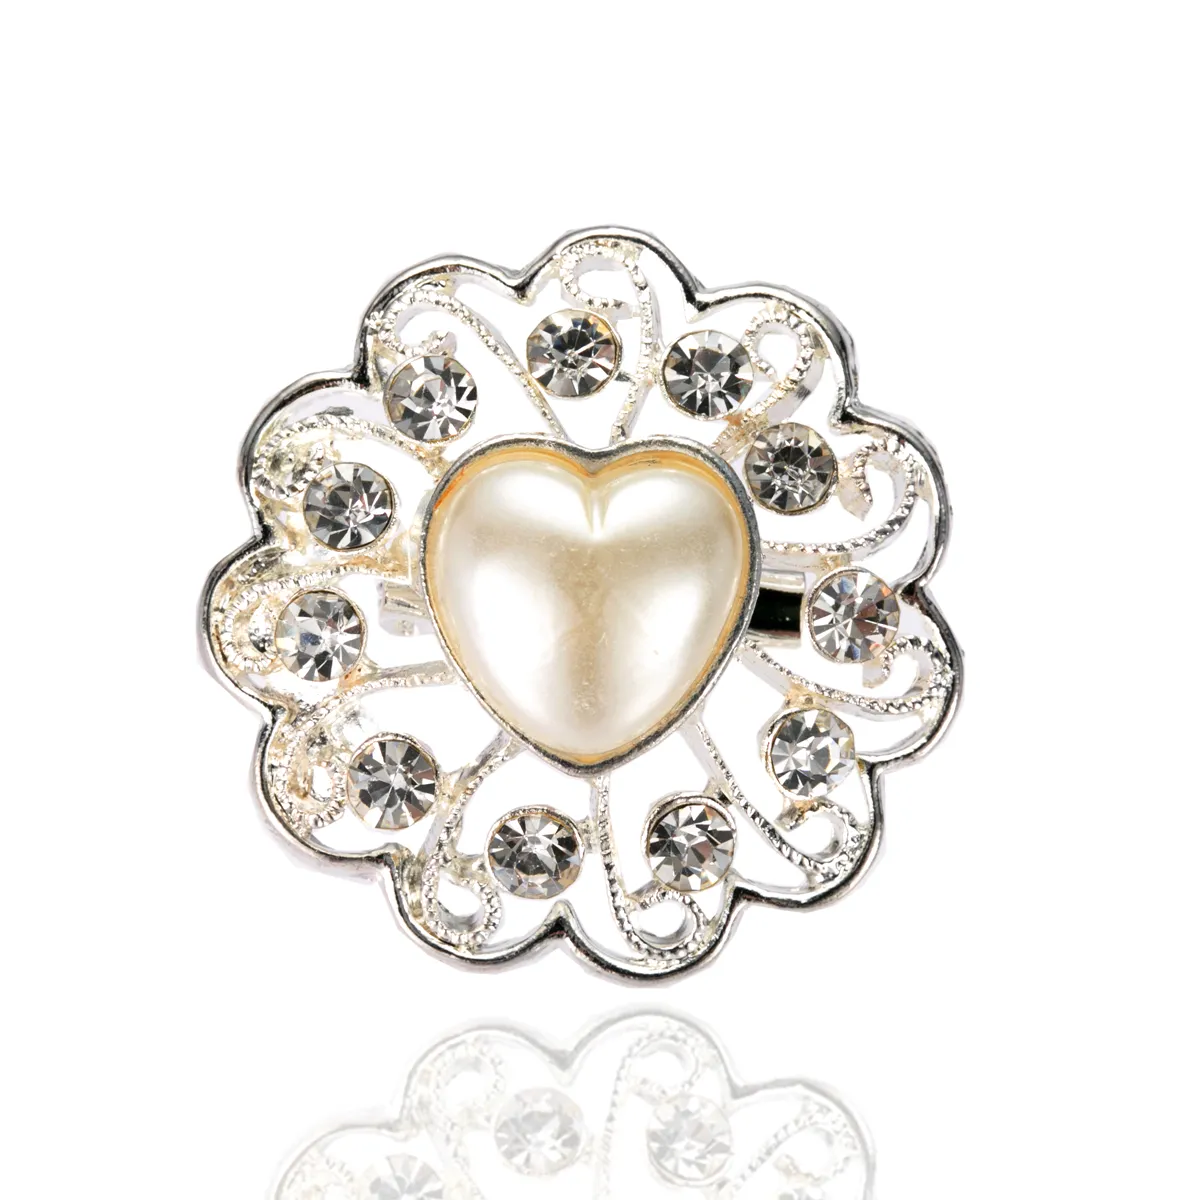 1.4 Inch Silver Plated Heart Shaped Pearl and Rhinestone Flower Brooch